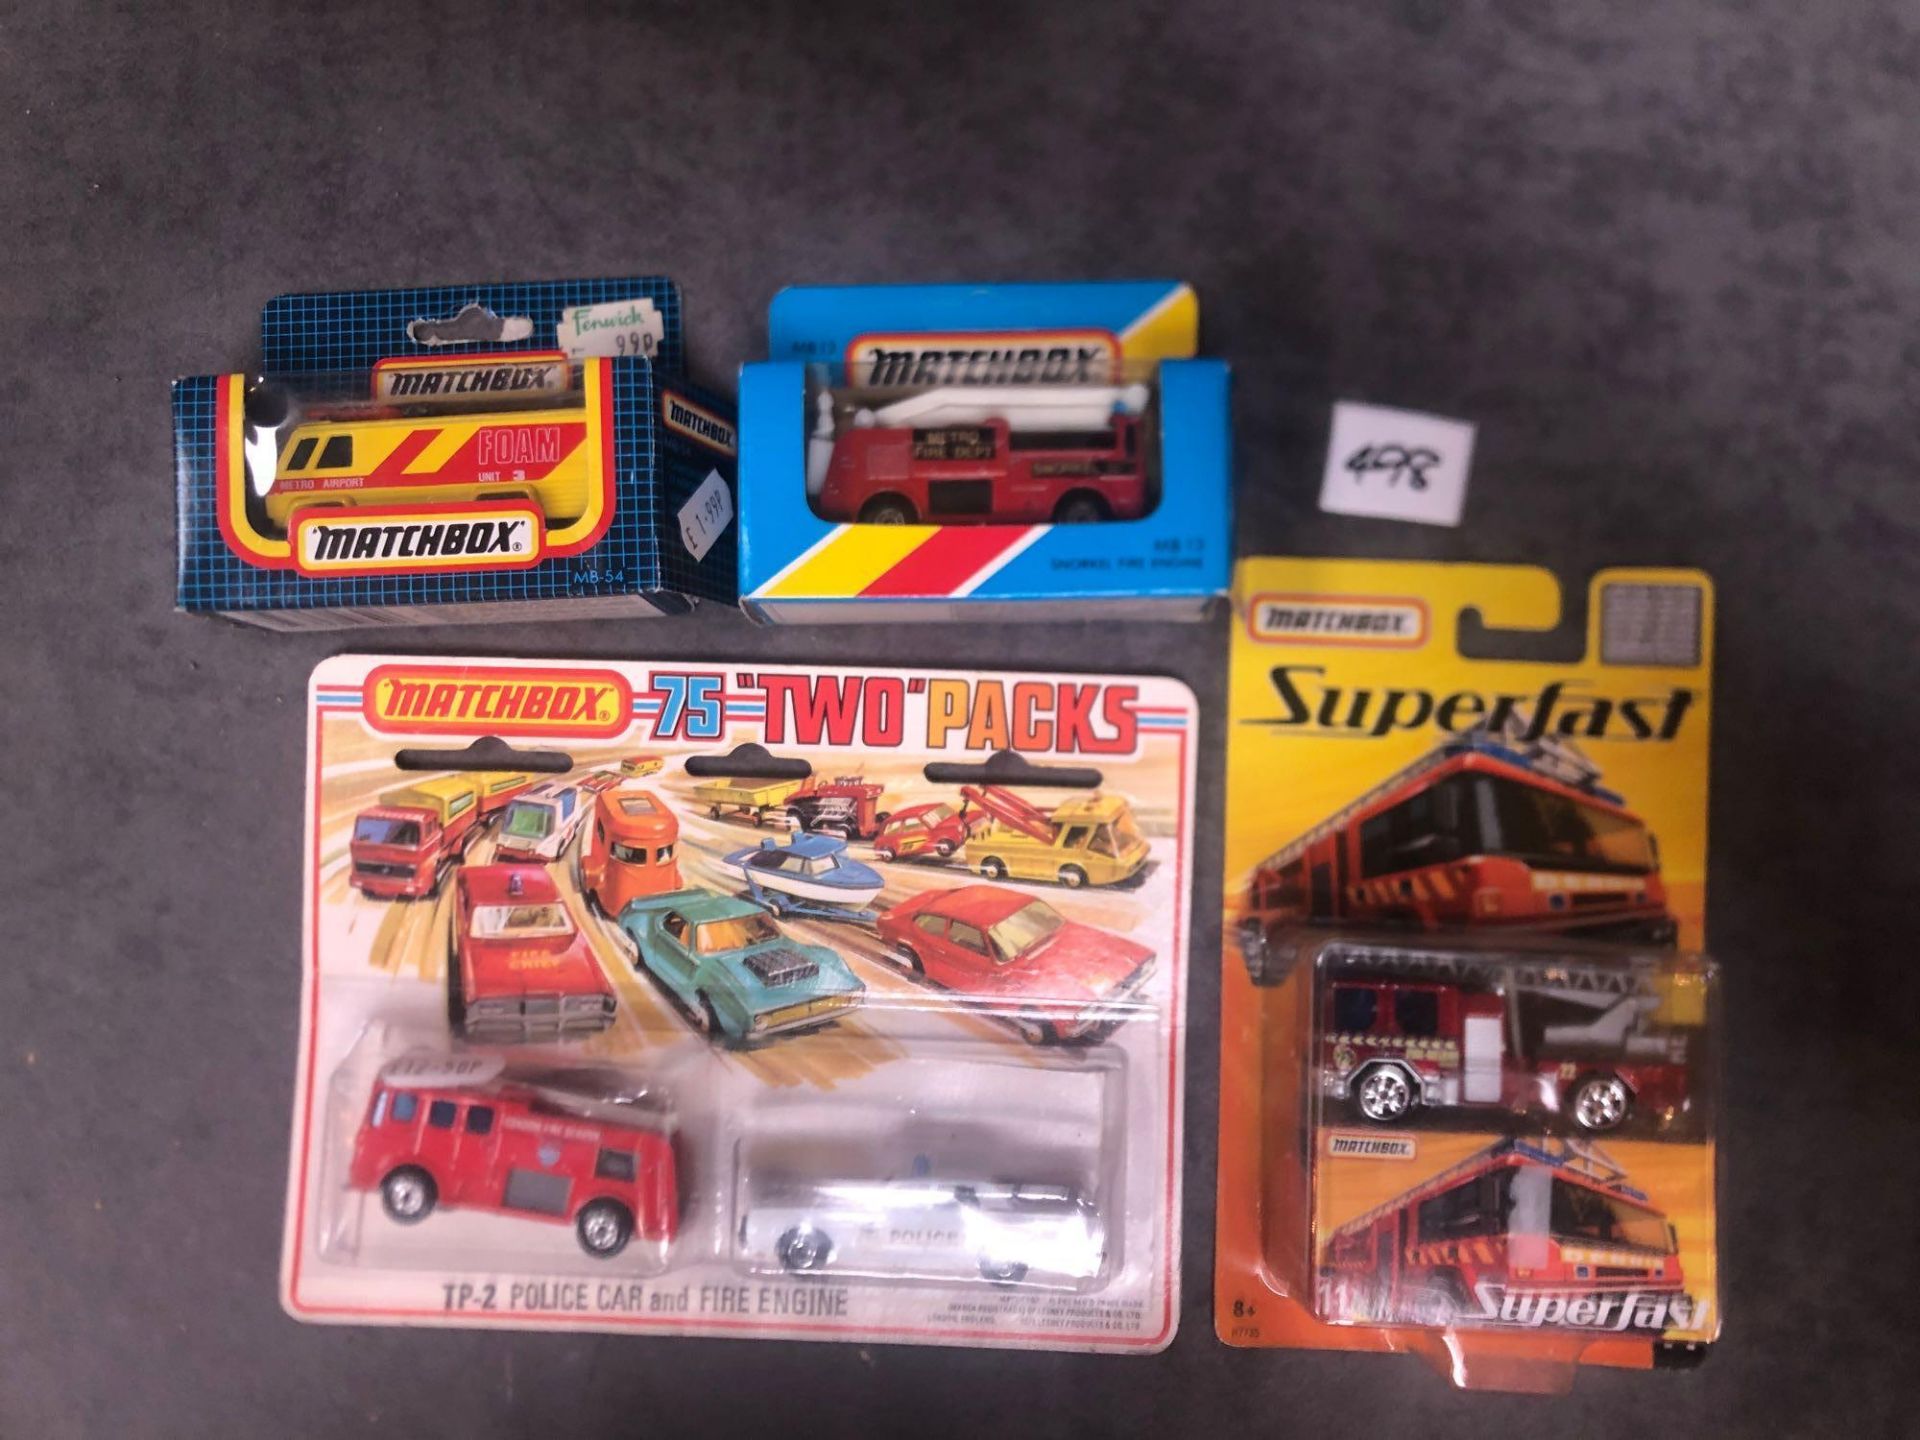 4 X Matchbox Diecast Vehicles Comprising Of # Matchbox Twin Pack Lesney TP-2 Police Car And Fire